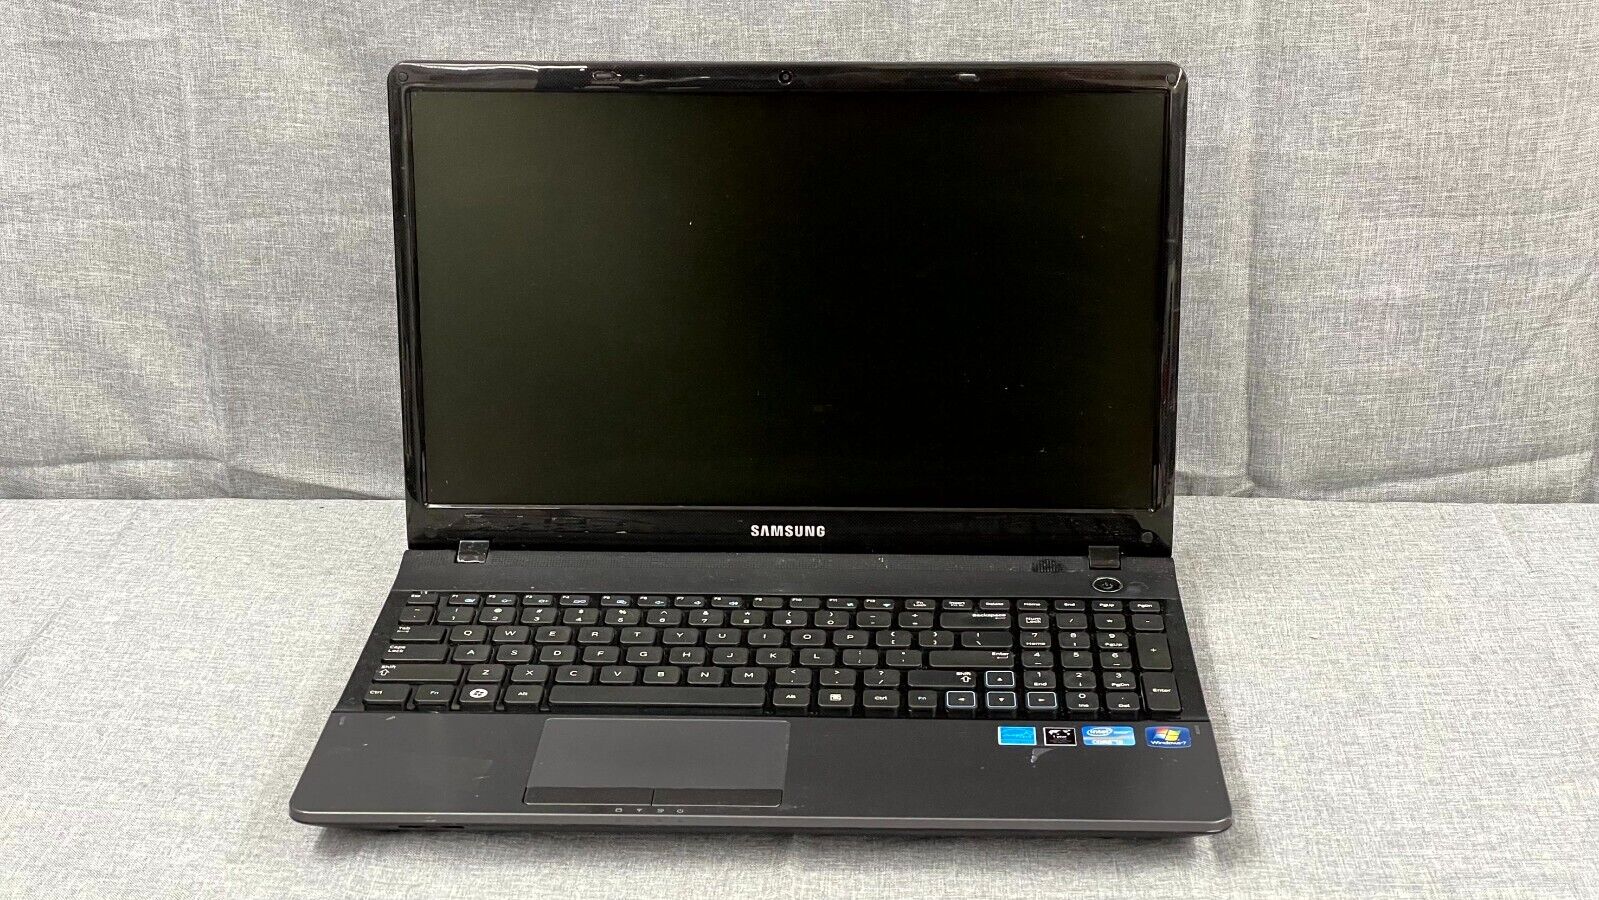 Samsung NP300E5A 15.6 Laptop AS IS Parts Repair Free Shipping. Available Now for 59.99